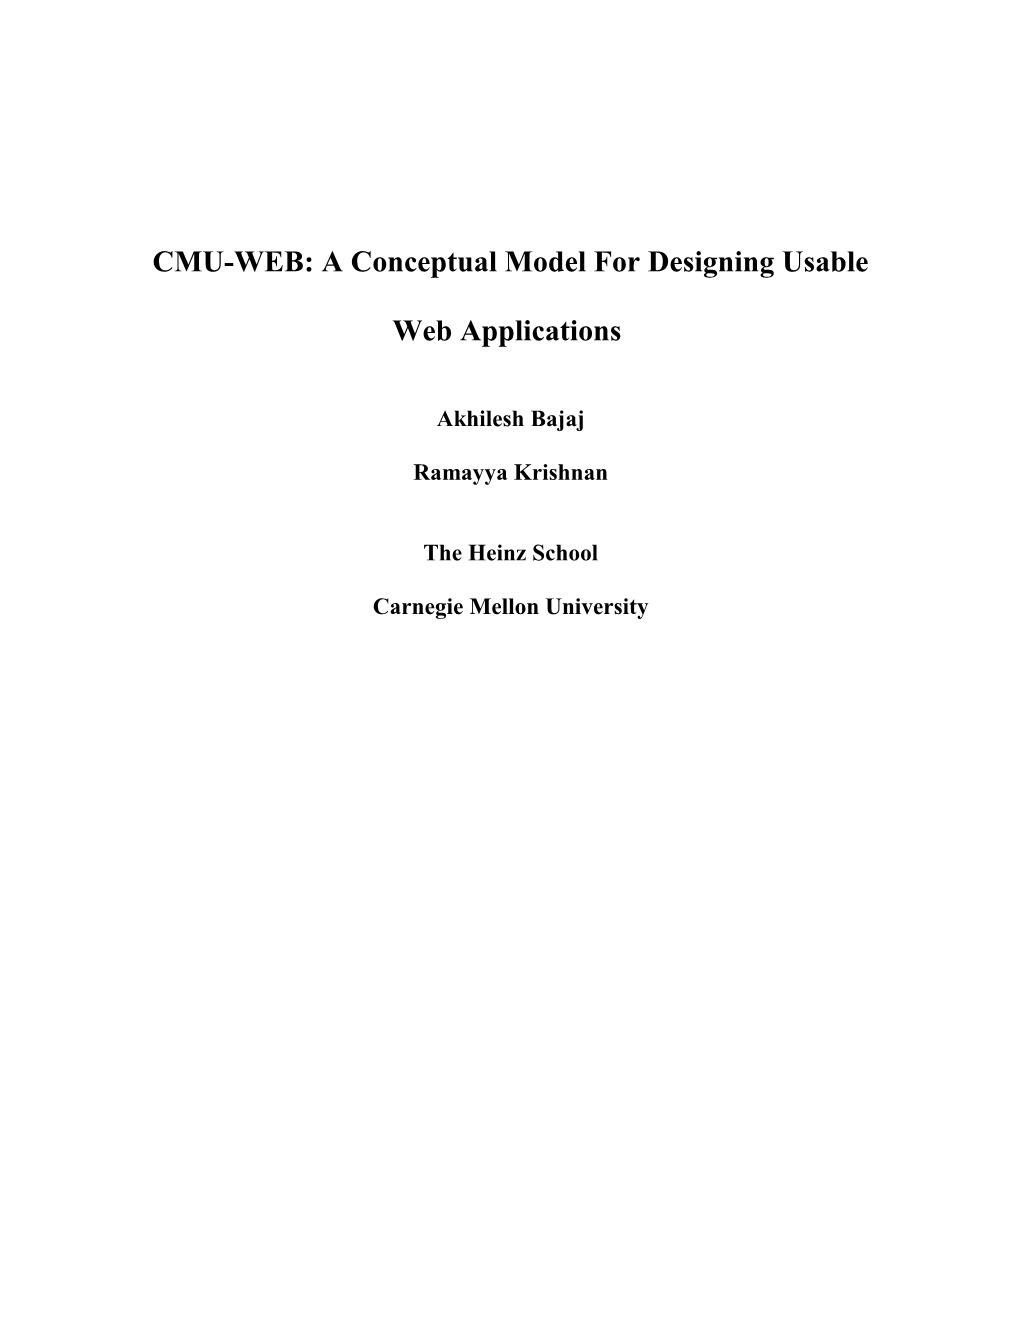 A Classification of Current World Wide Web Applications and Development Models for Each